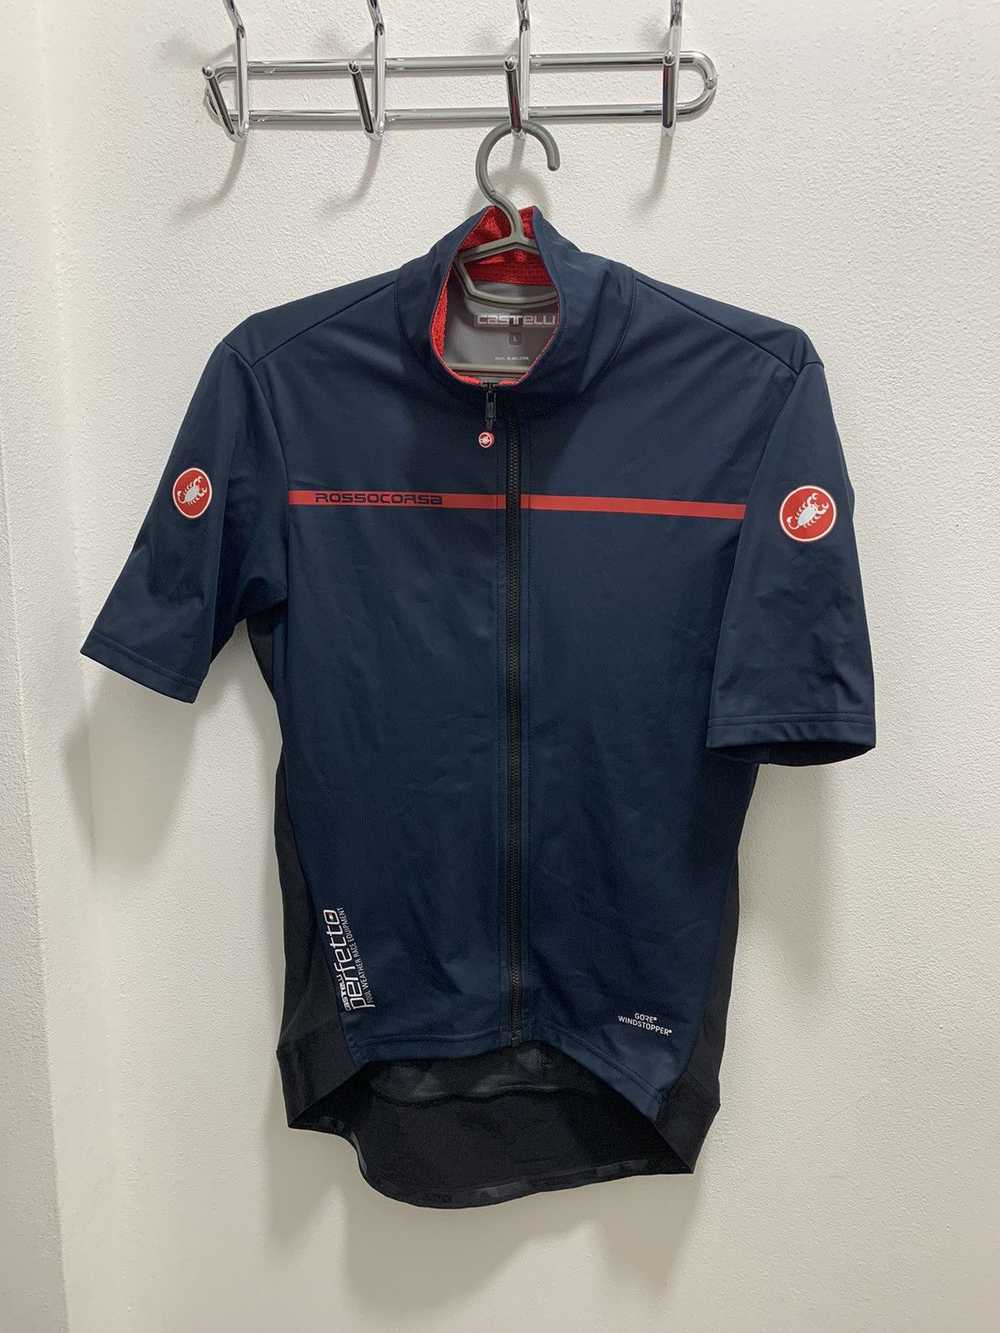 Bicycle × Cycle × Sportswear Castelli Rosso Corsa… - image 1